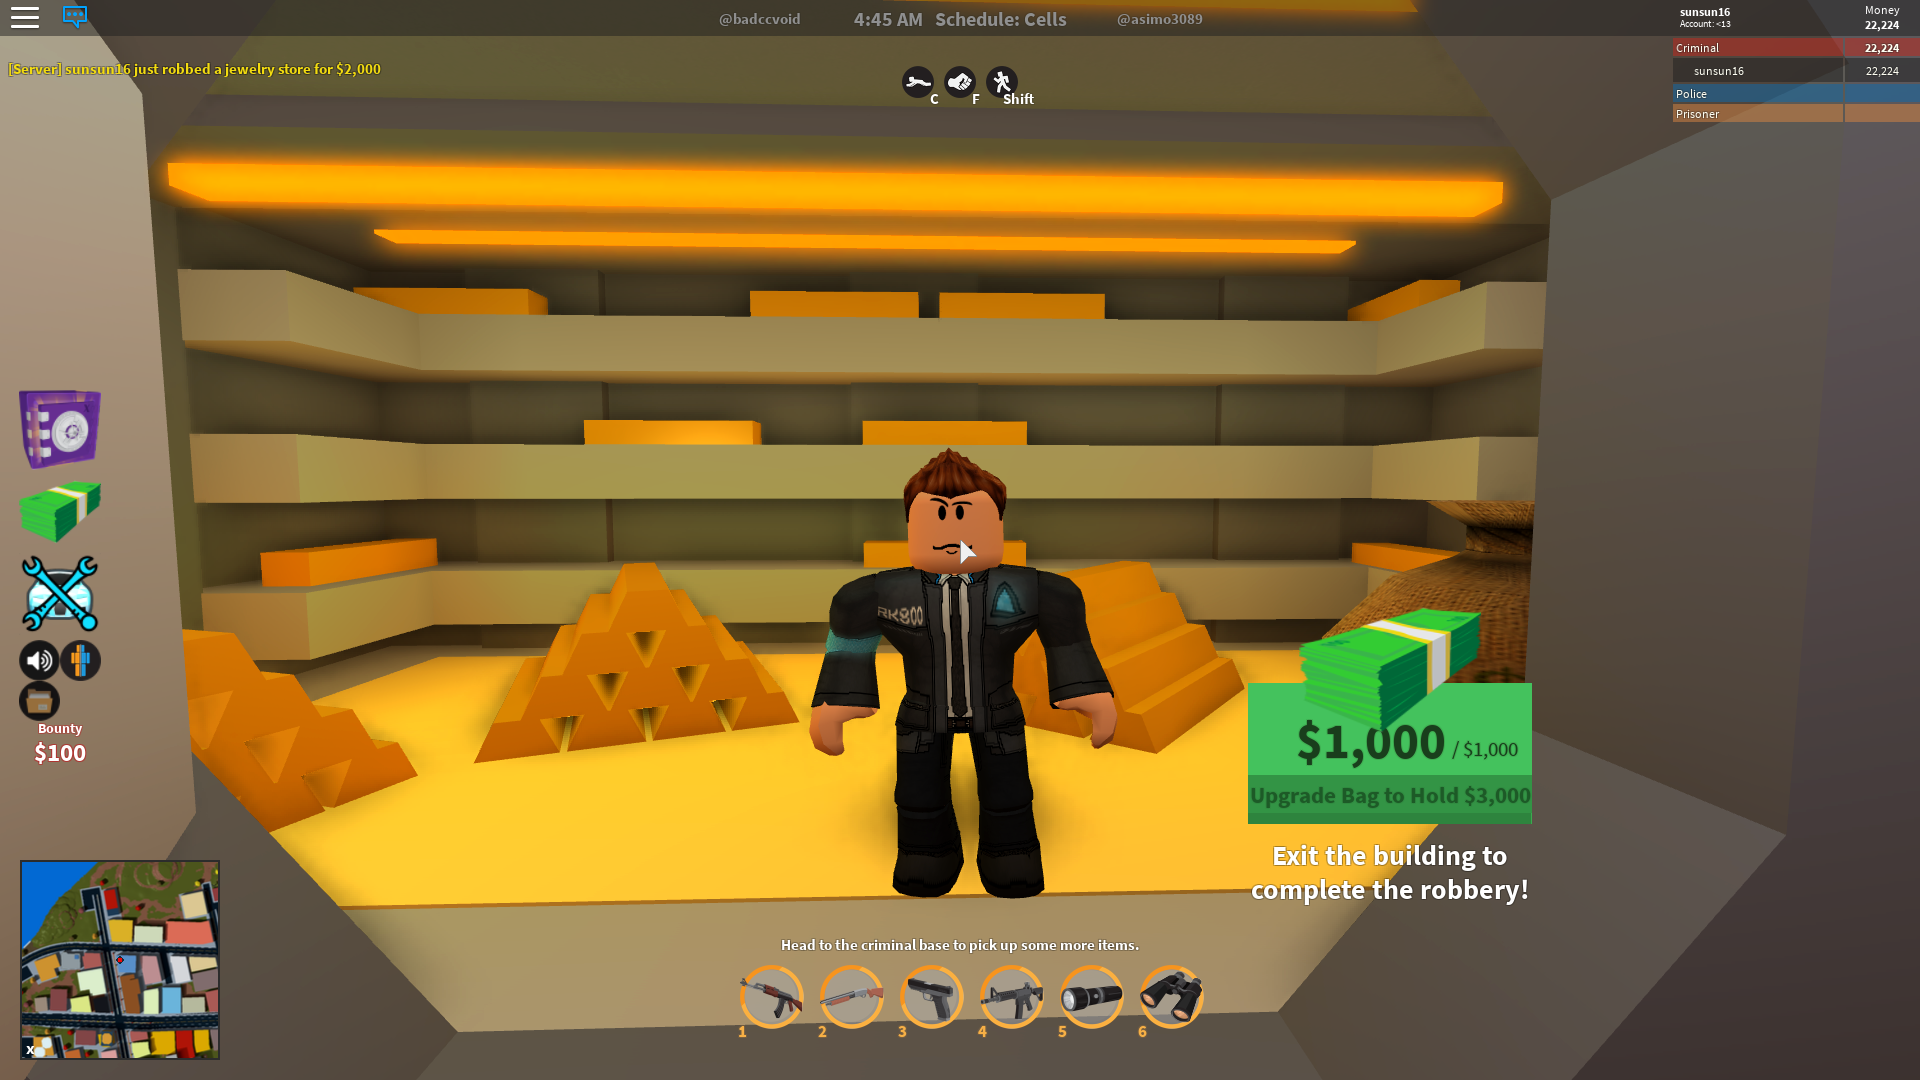 New Way To Rob Bank Without Key Roblox Jailbreak New Bank - roblox jailbreak how to rob bank without keycard